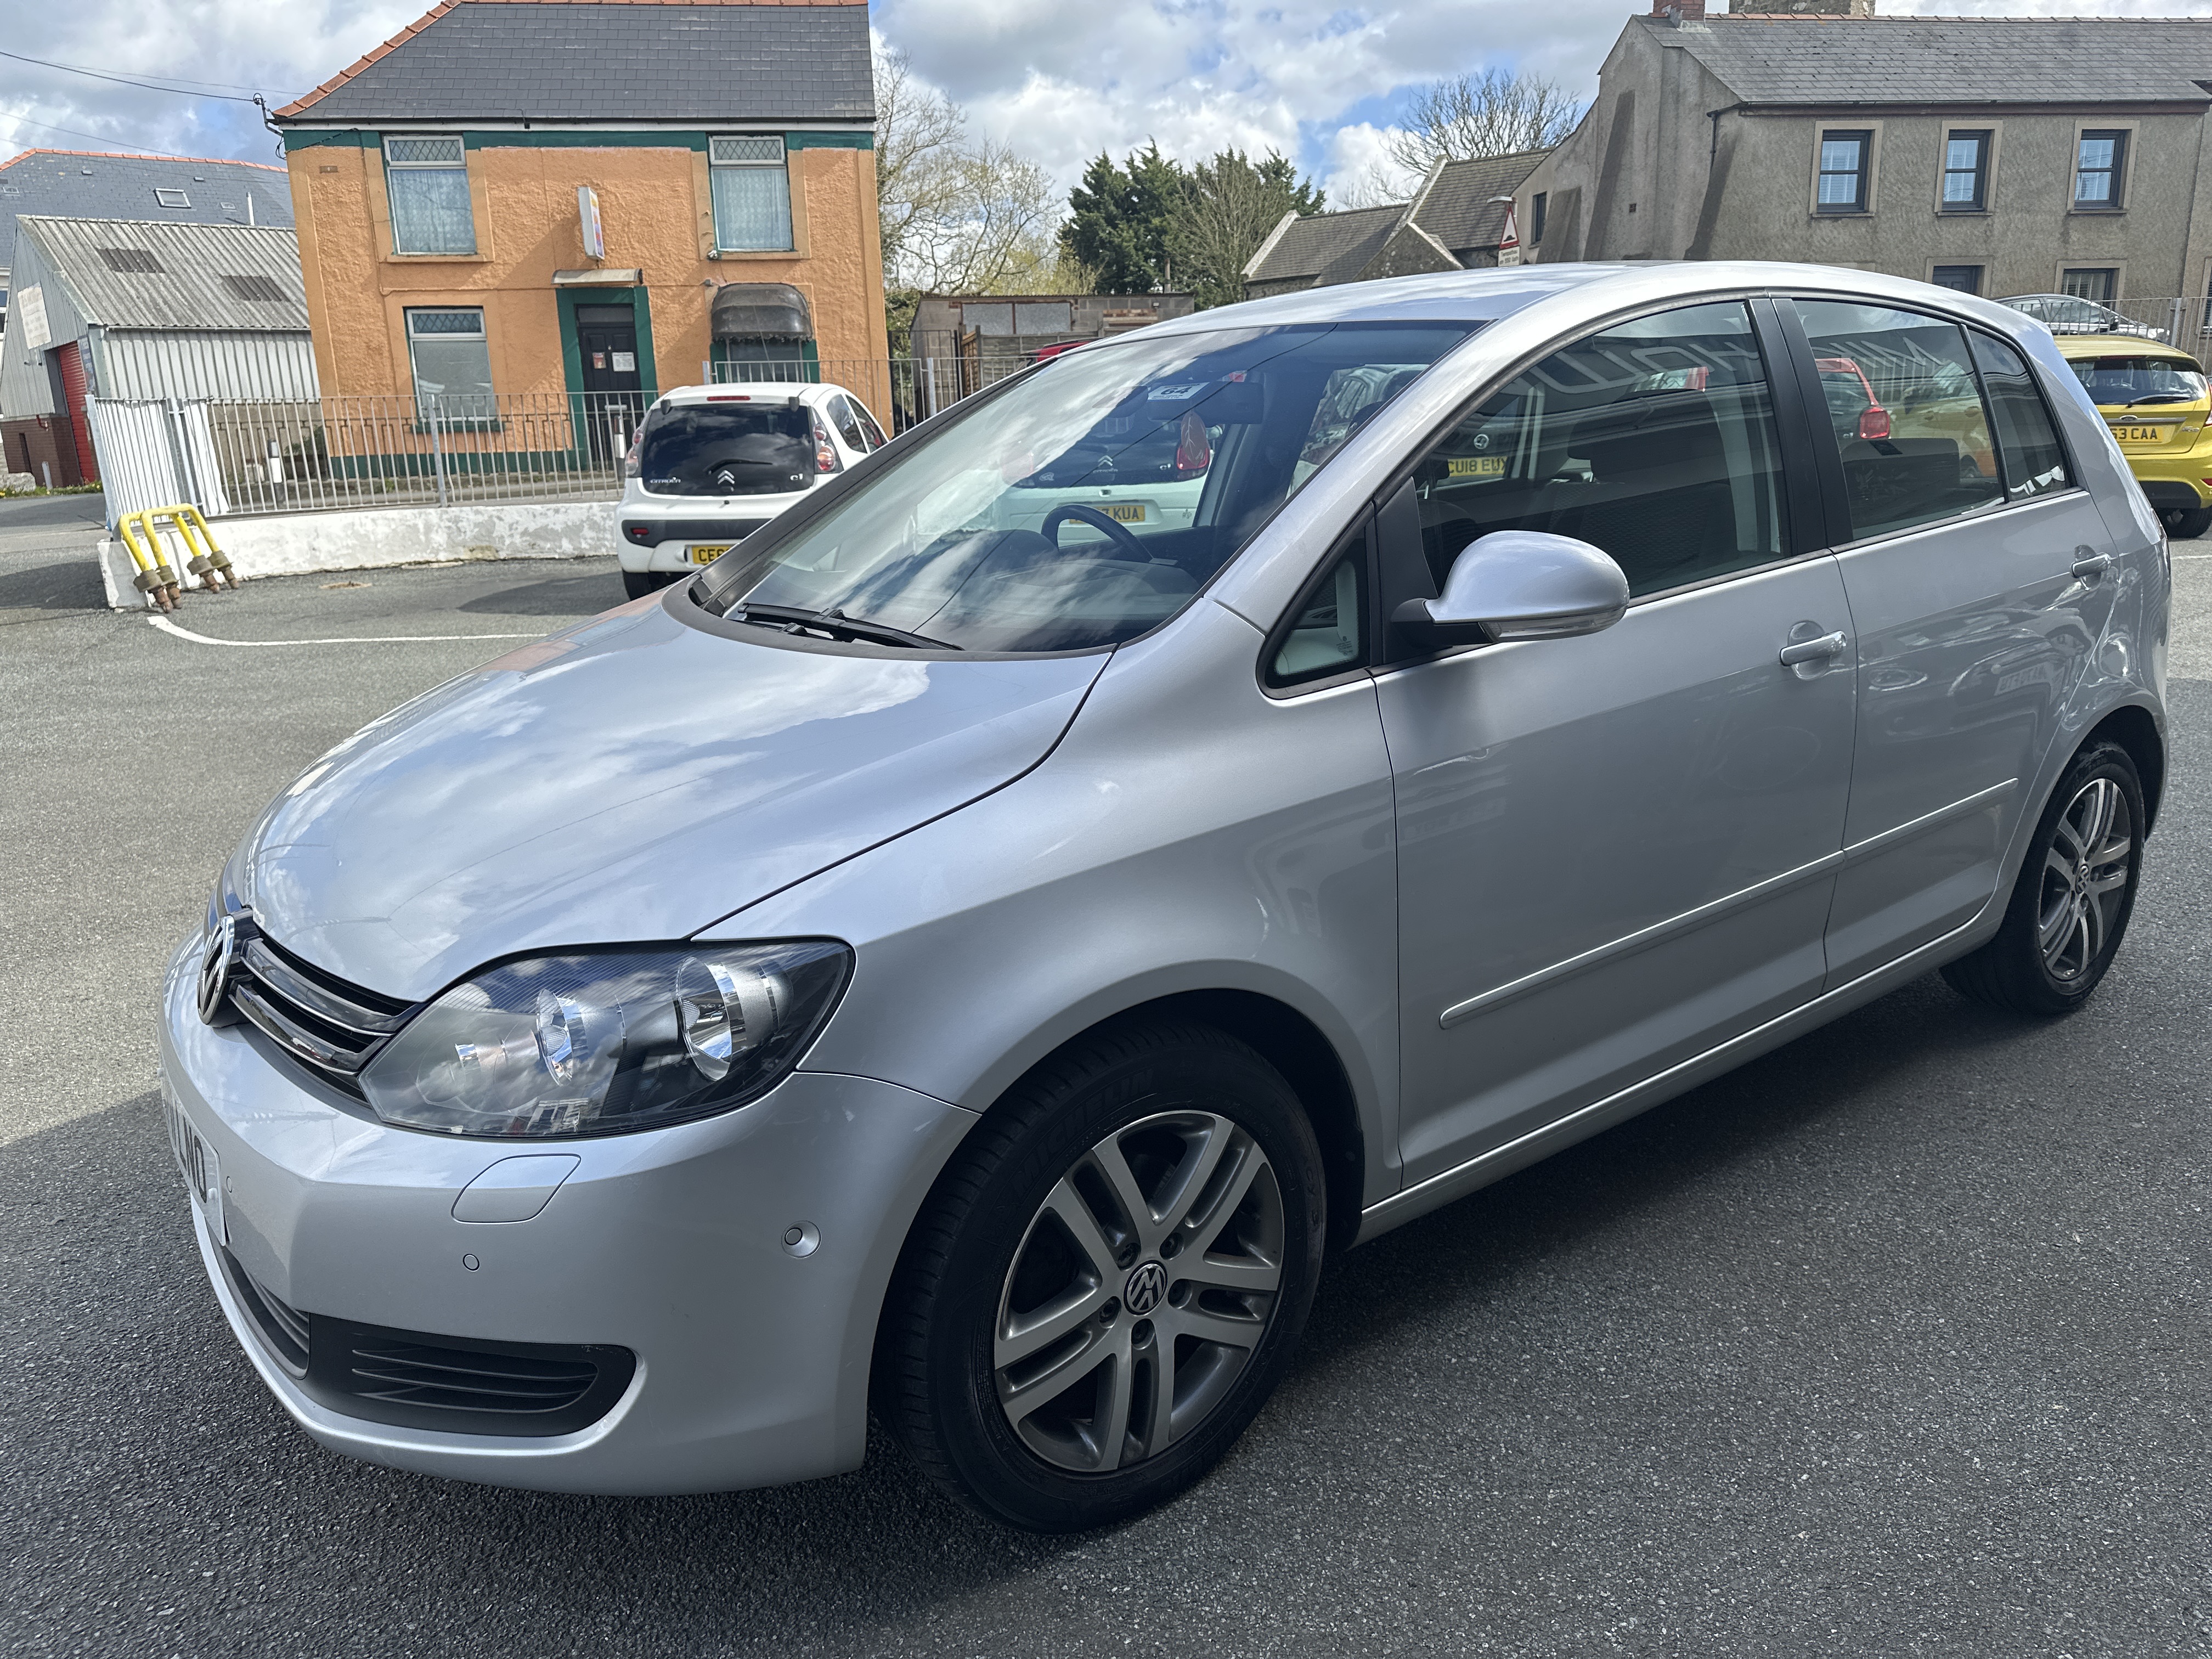 Volkswagen GOLF PLUS SE TDI for sale at Mike Howlin Motor Sales Pembrokeshire